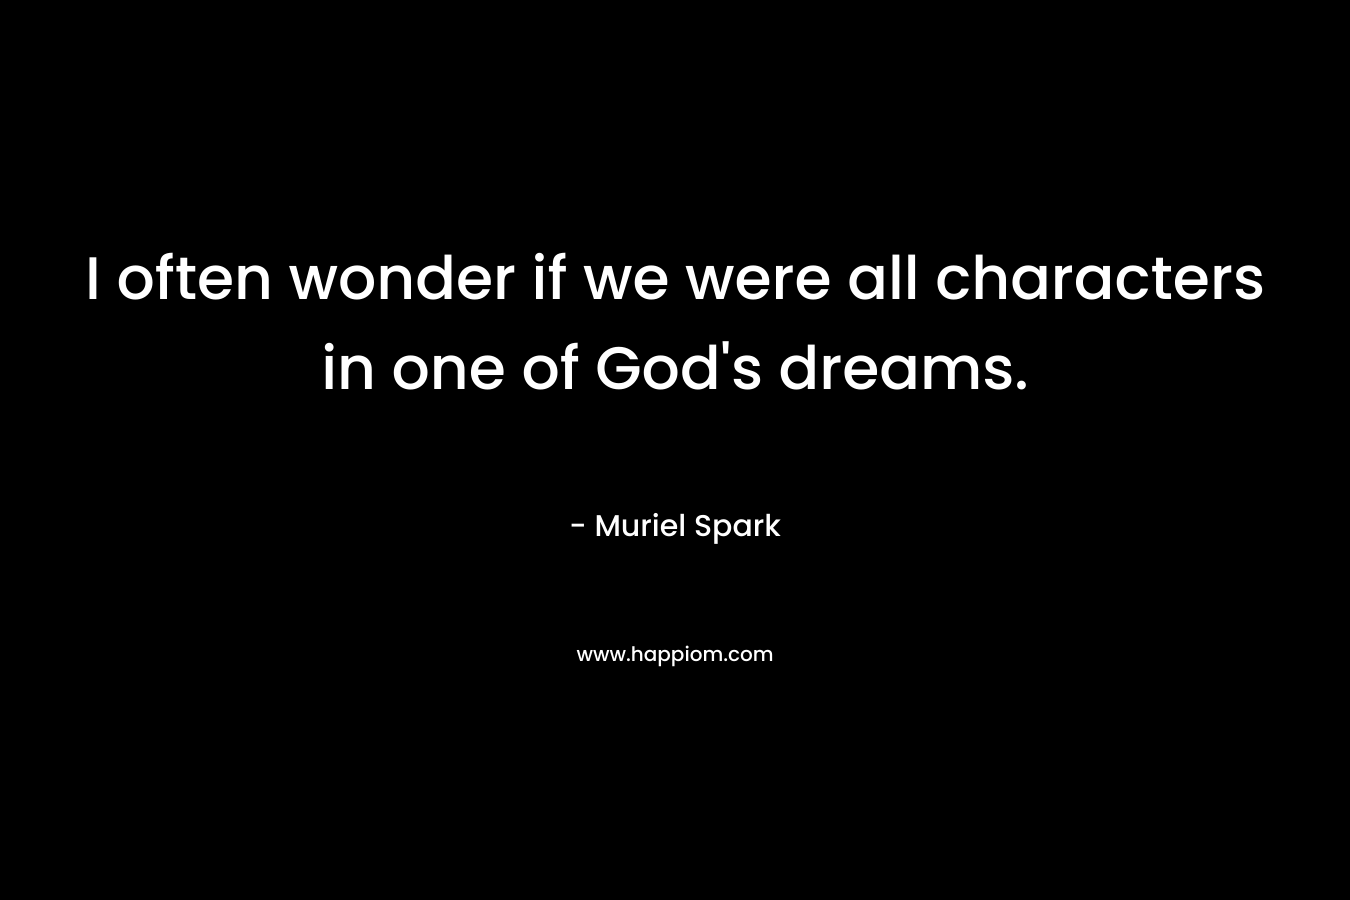 I often wonder if we were all characters in one of God's dreams.